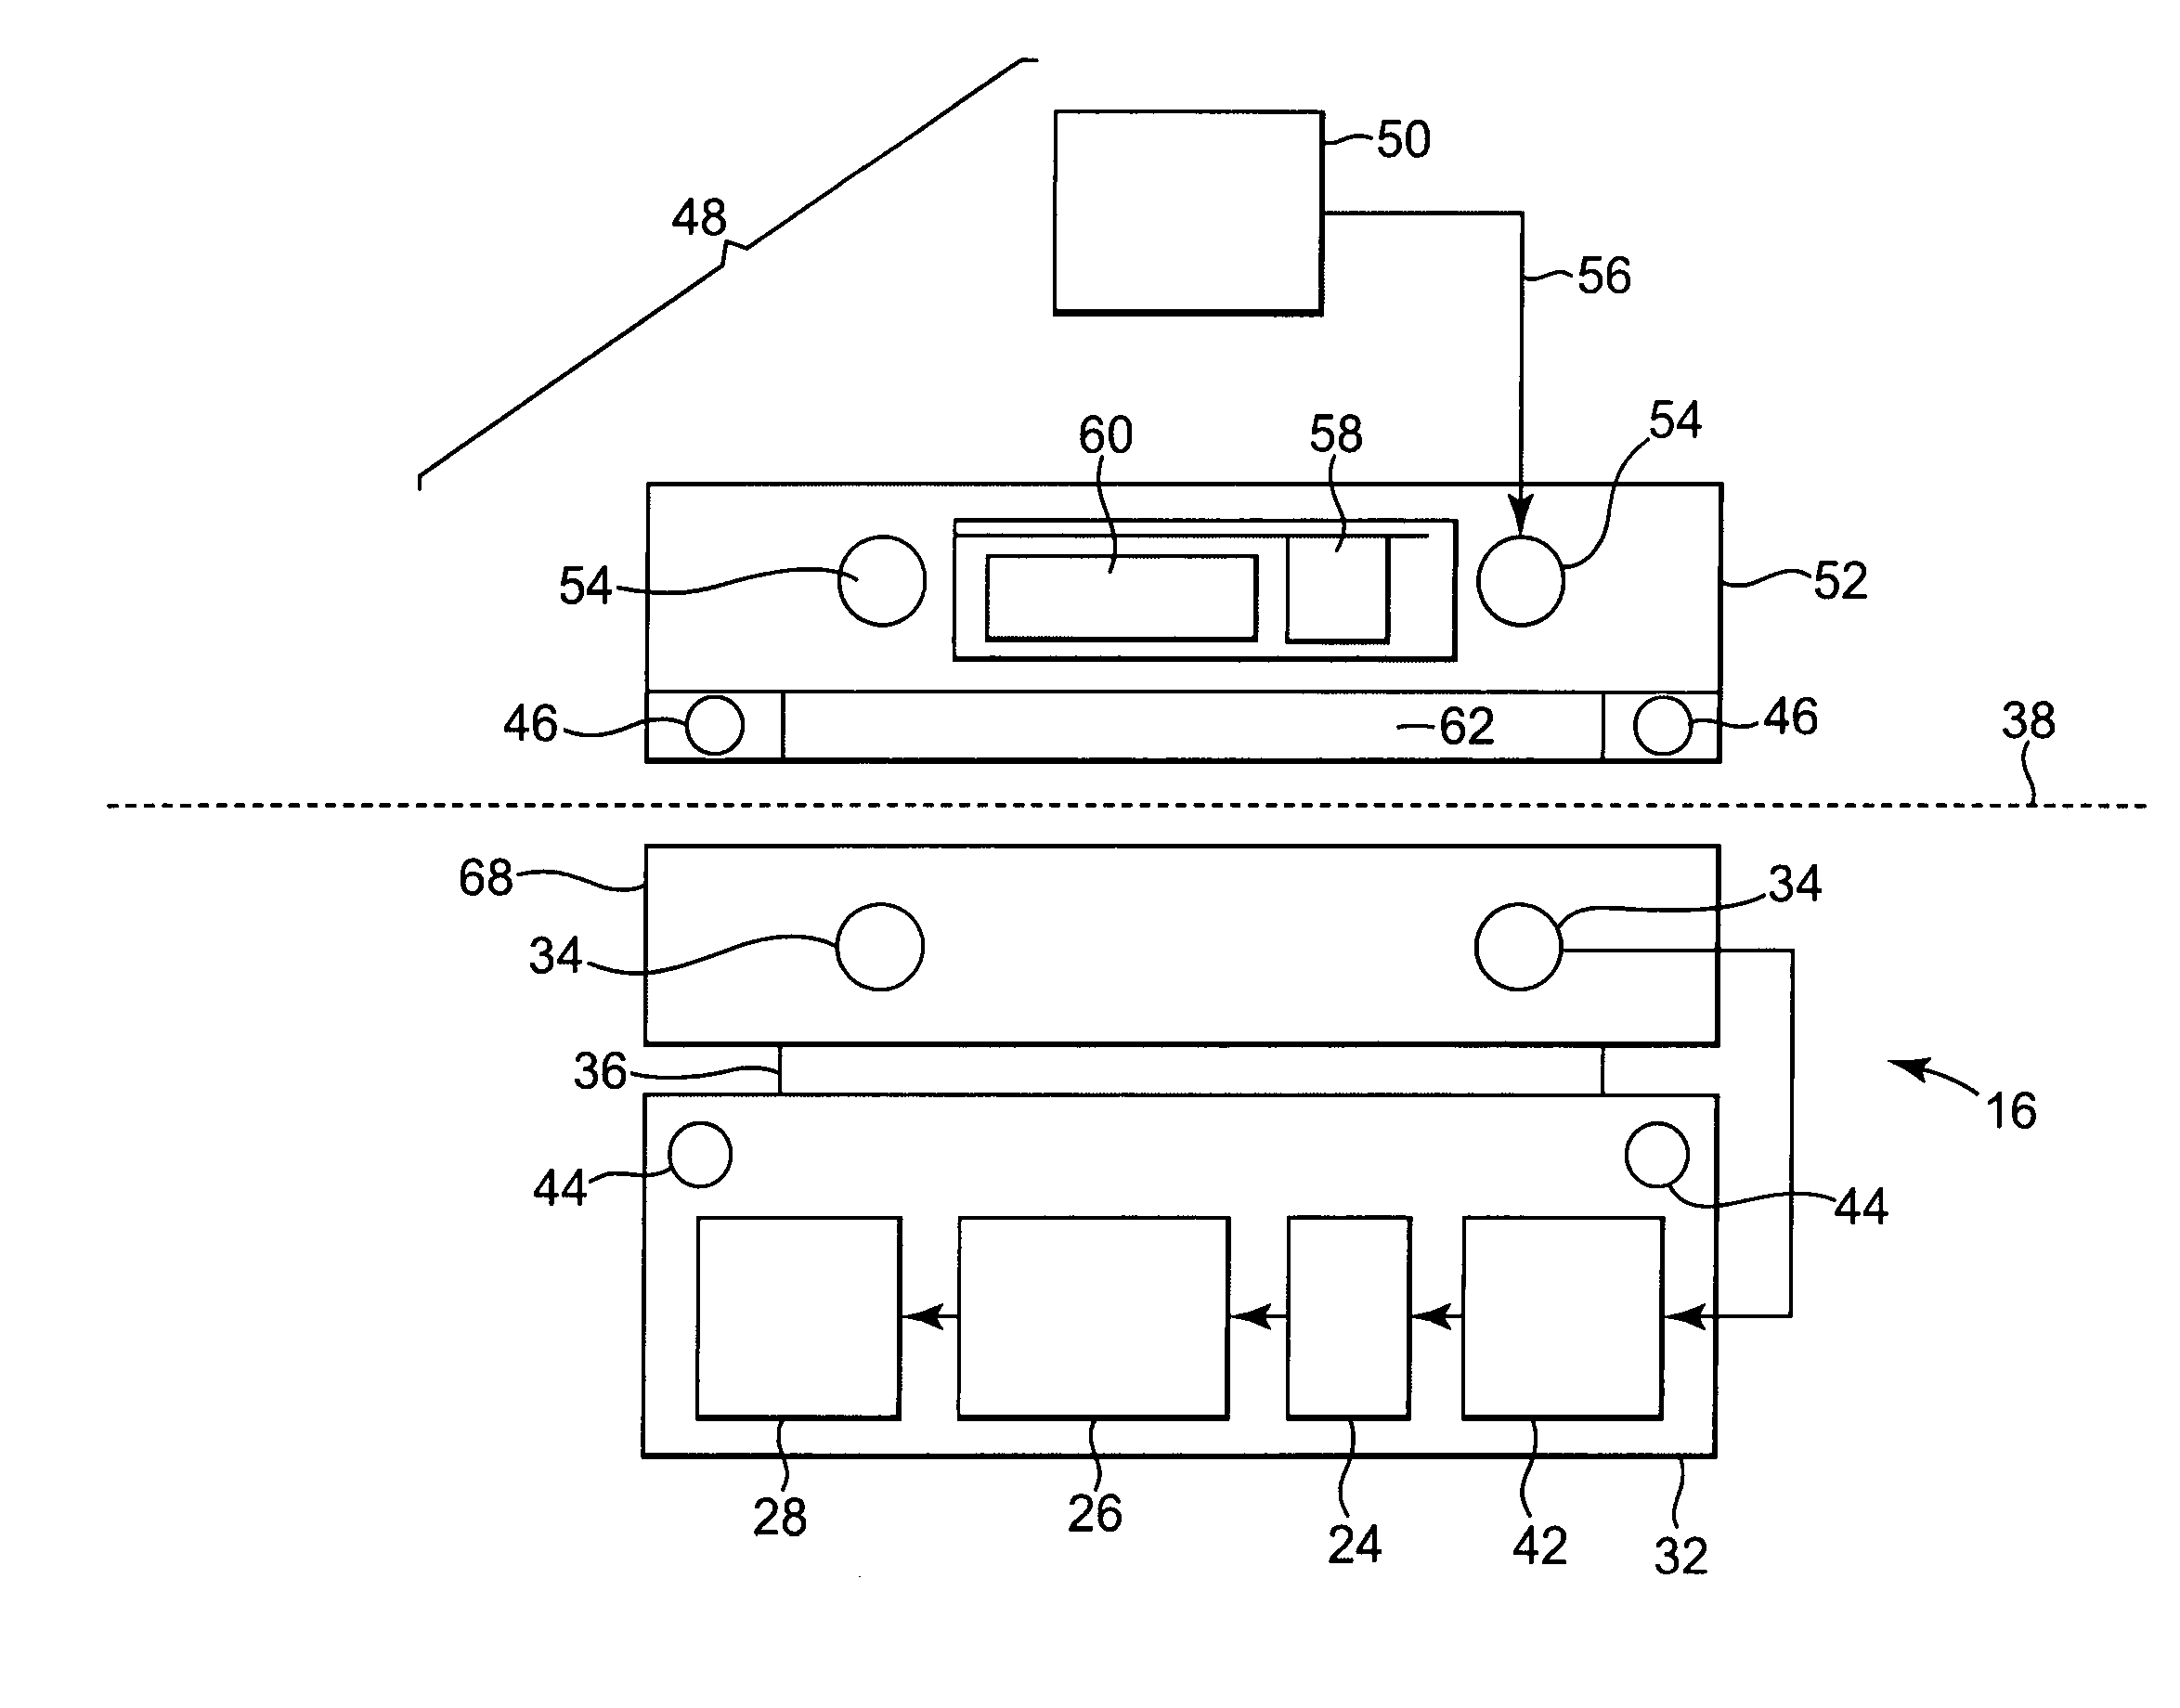 External power source, charger and system for an implantable medical device having thermal characteristics and method therefore